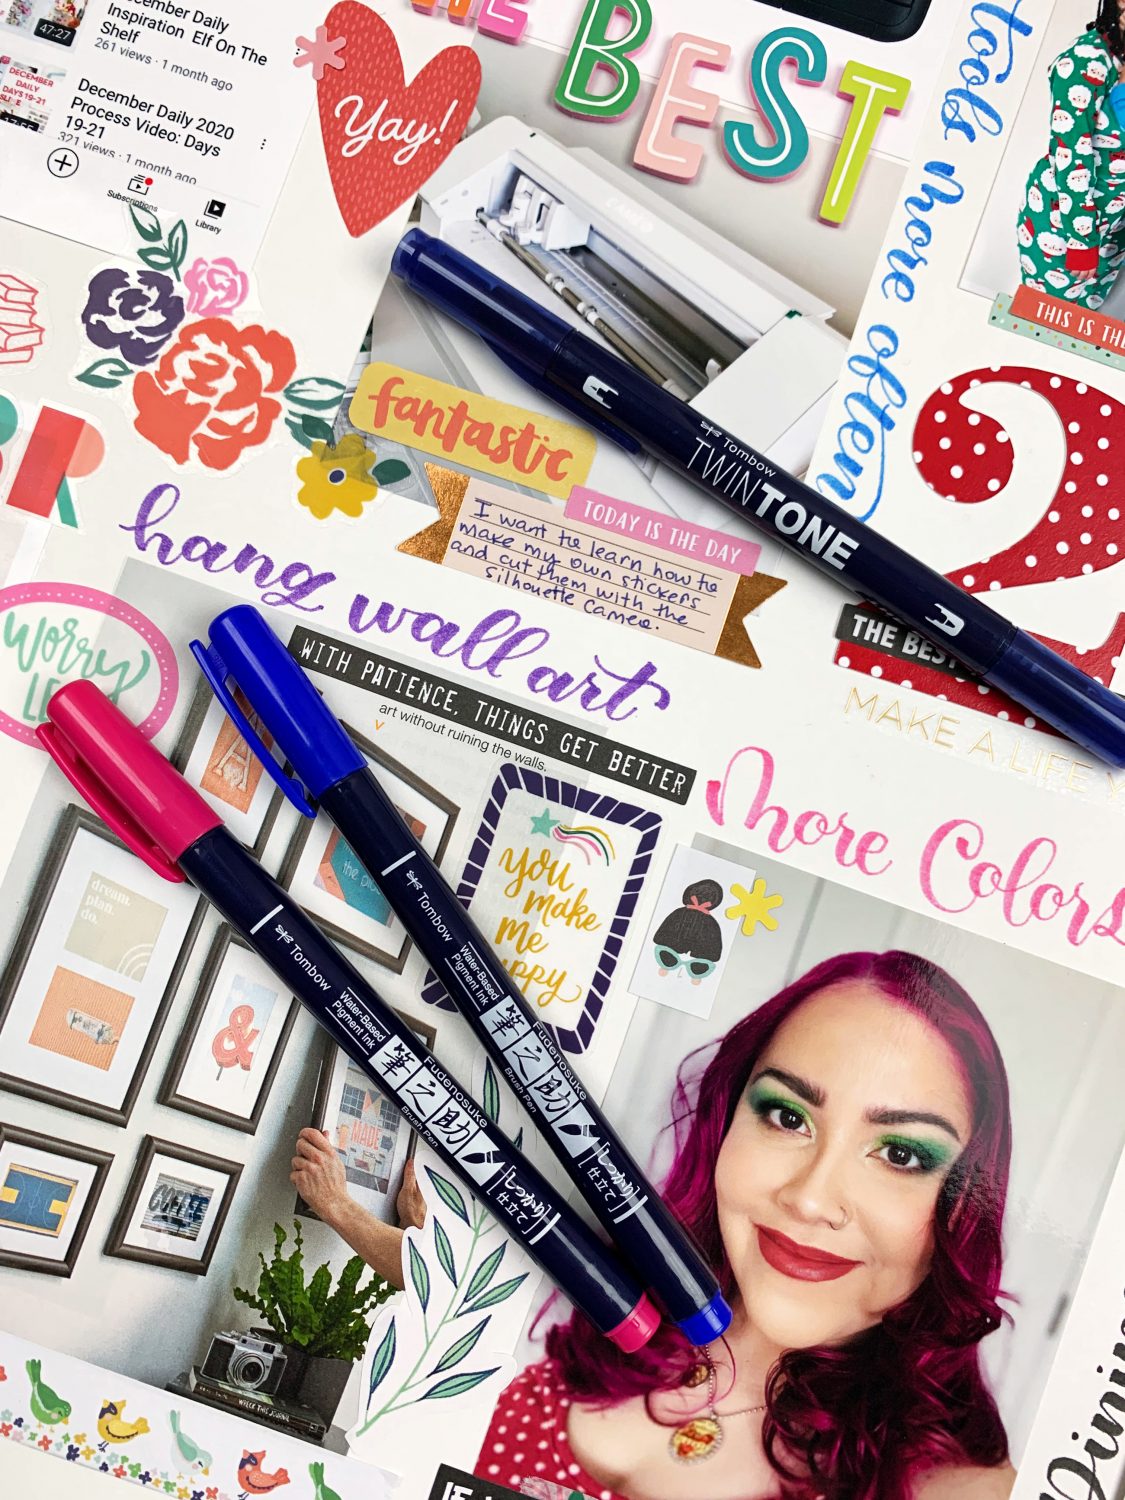 Use the Tombow Fudenosuke Brush Pen to add lettering or journaling to your vision board. #tombow #visionboard